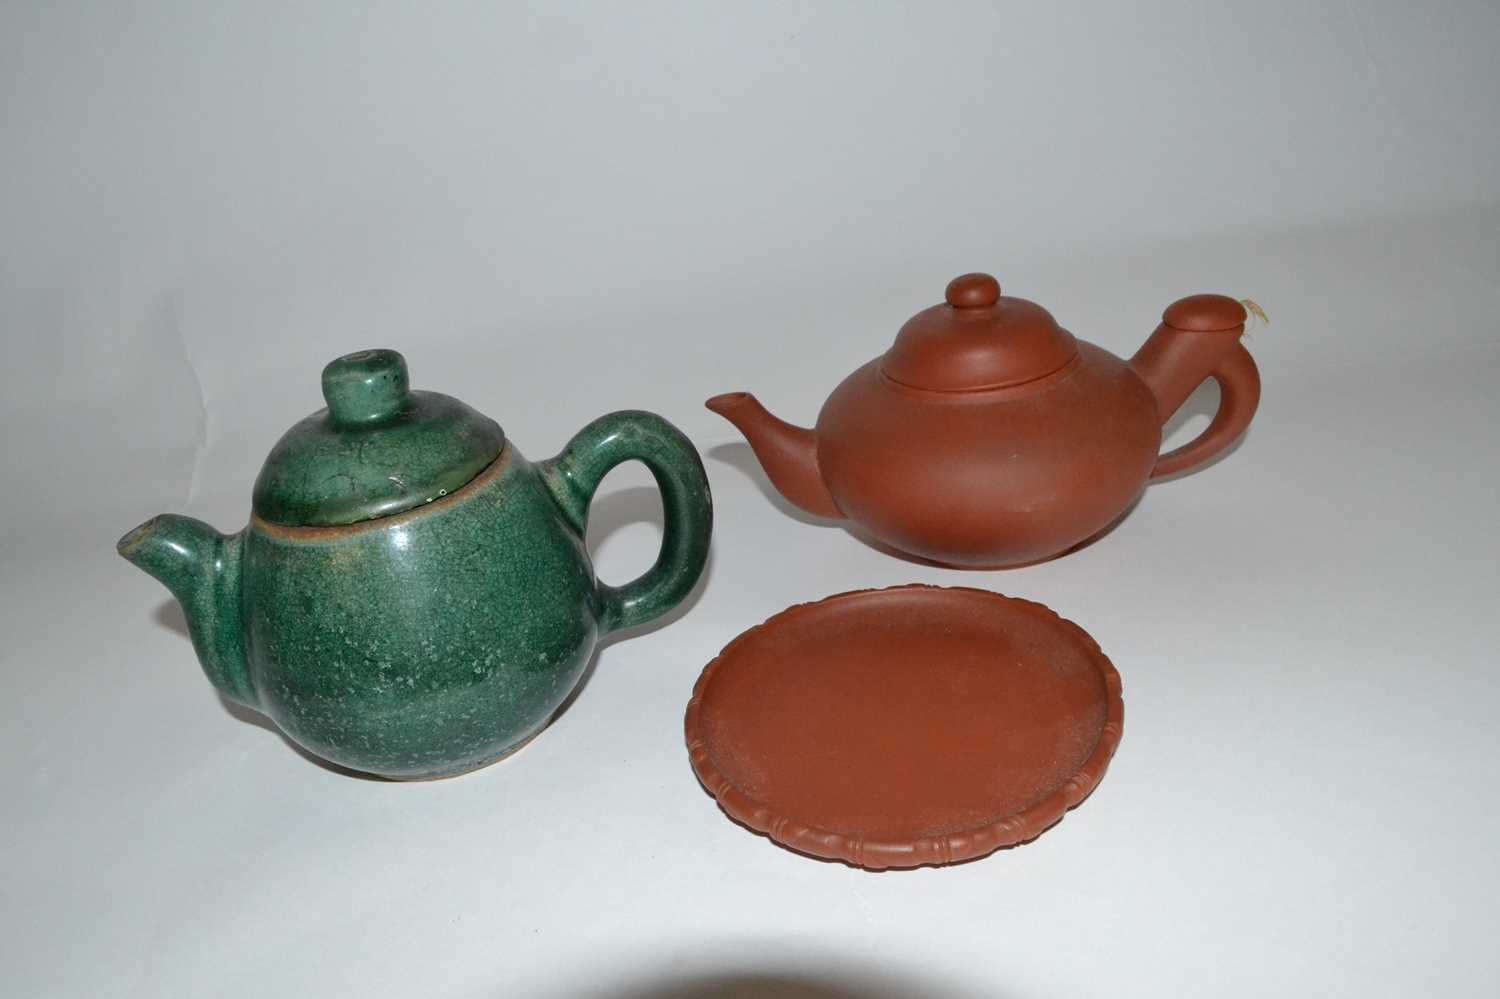 A Chinese pottery green glazed teapot together with a Yixing style teapot marked Haiphong, Vietnam